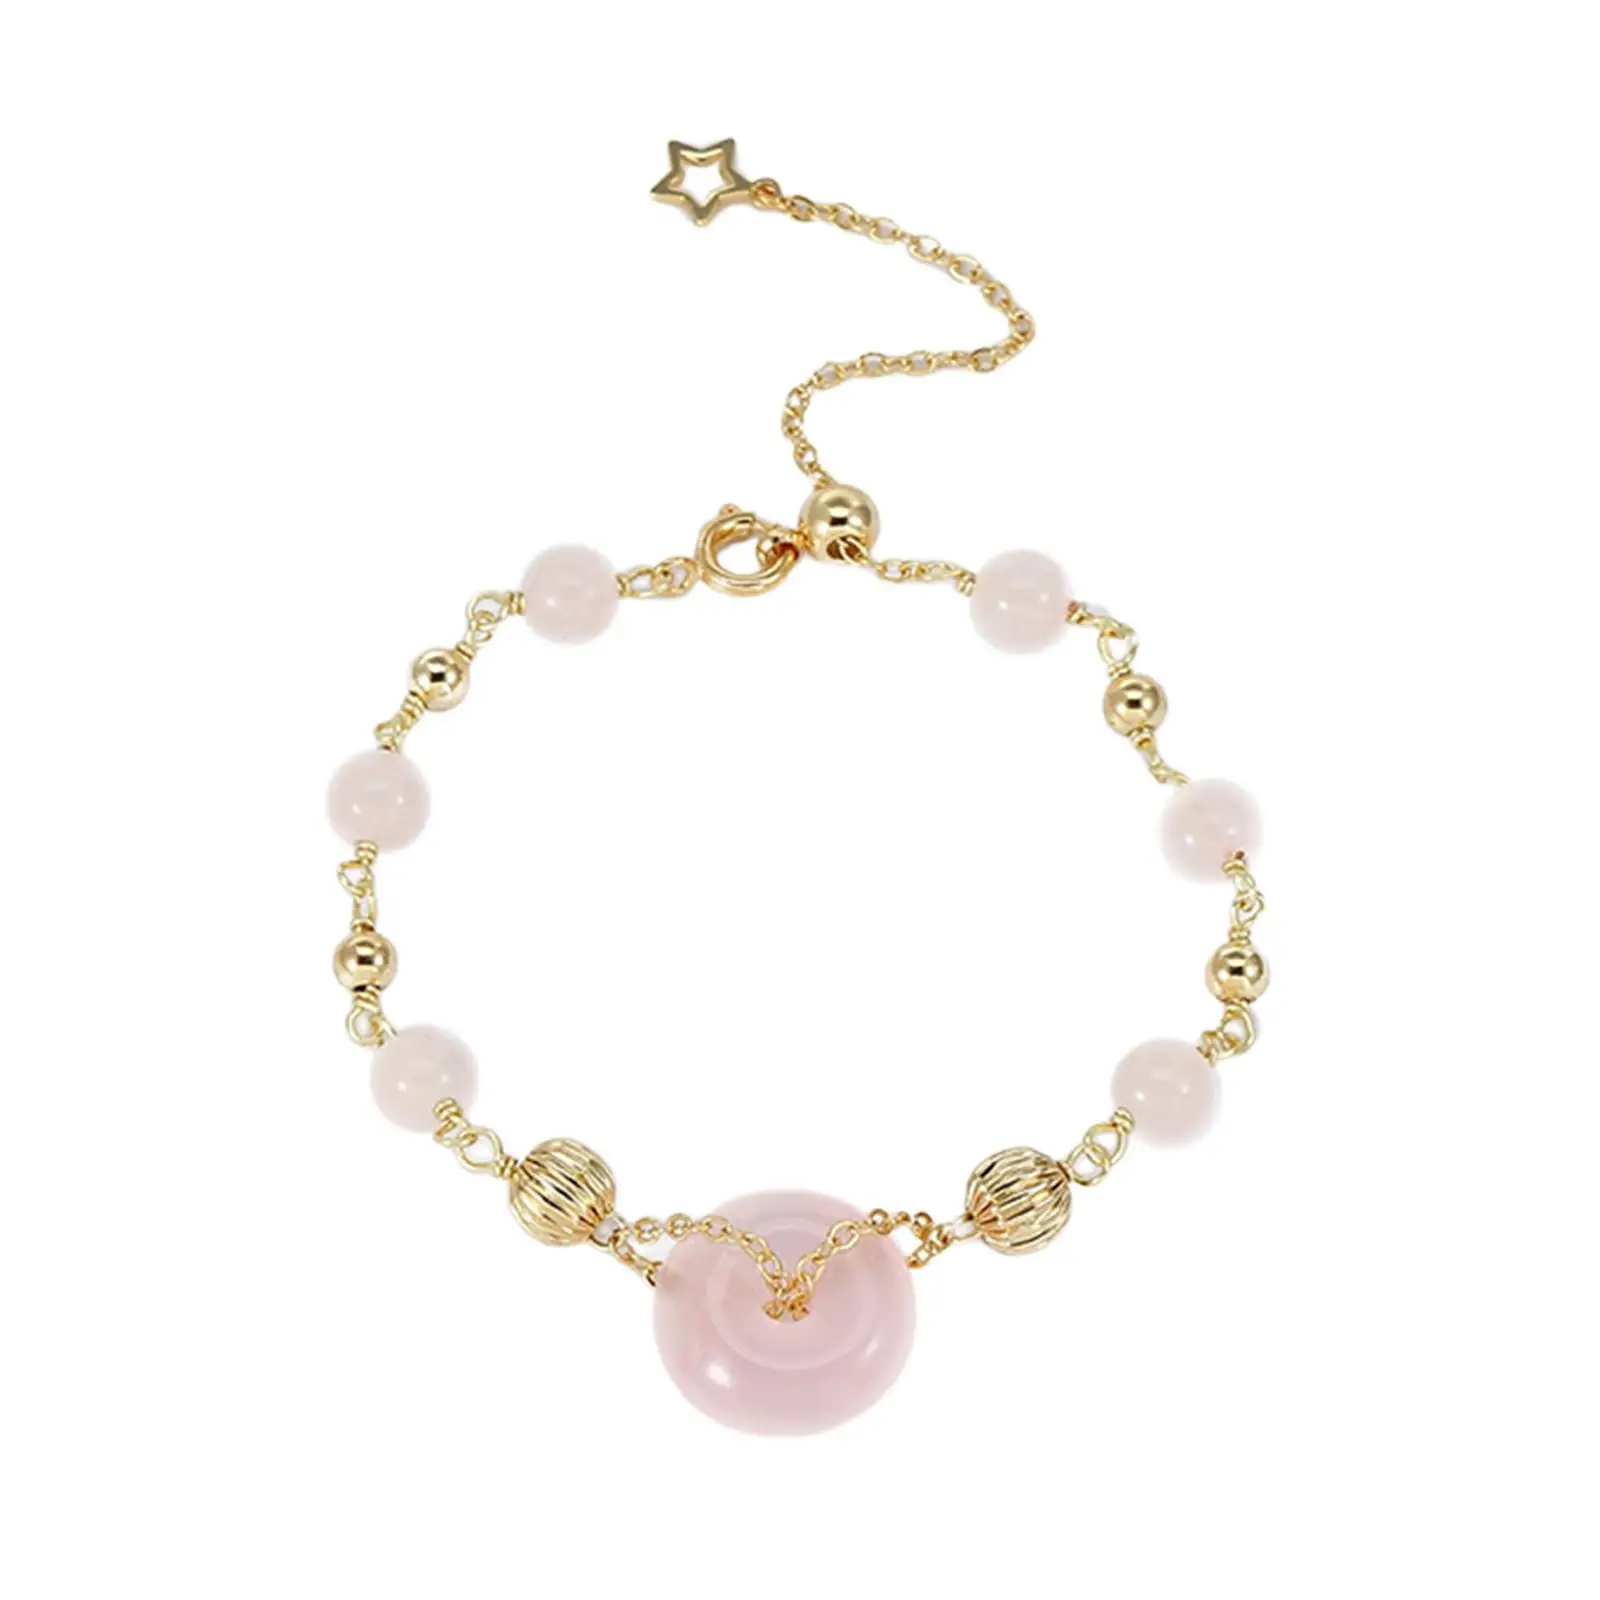 Classic Pink Beads Bracelet Decoration Delicate Jewelry Charm Beaded Bangle for Birthday Gifts Different Ages Daily wearing